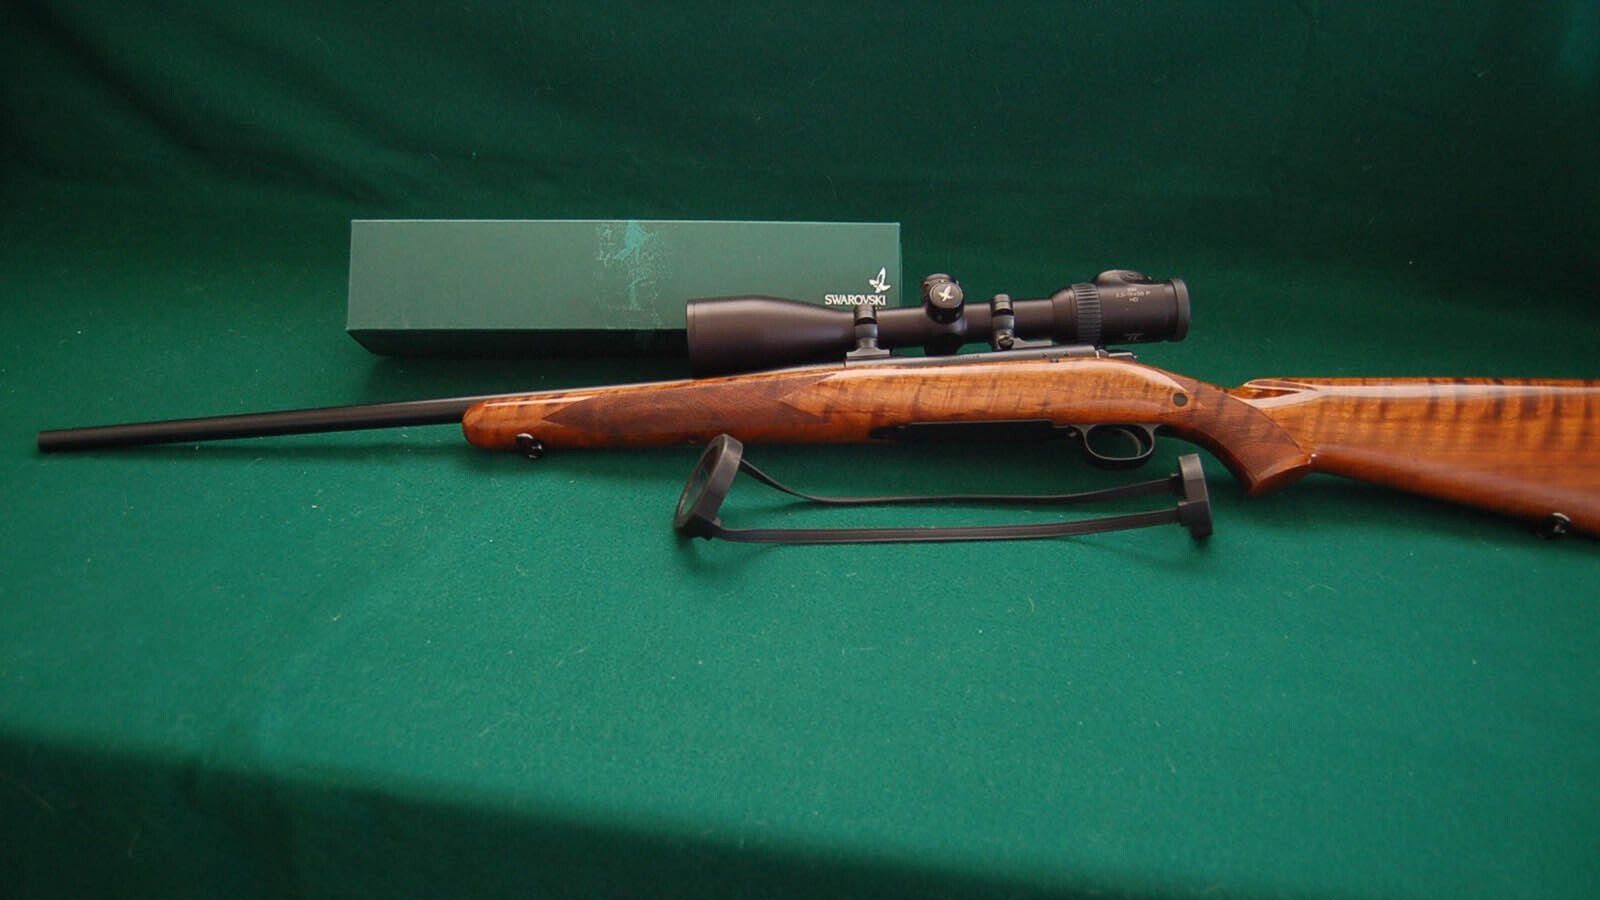 The pre- 1964 Model 70 Winchester remains one of the most sought-after rifles among serious collectors and shooters.